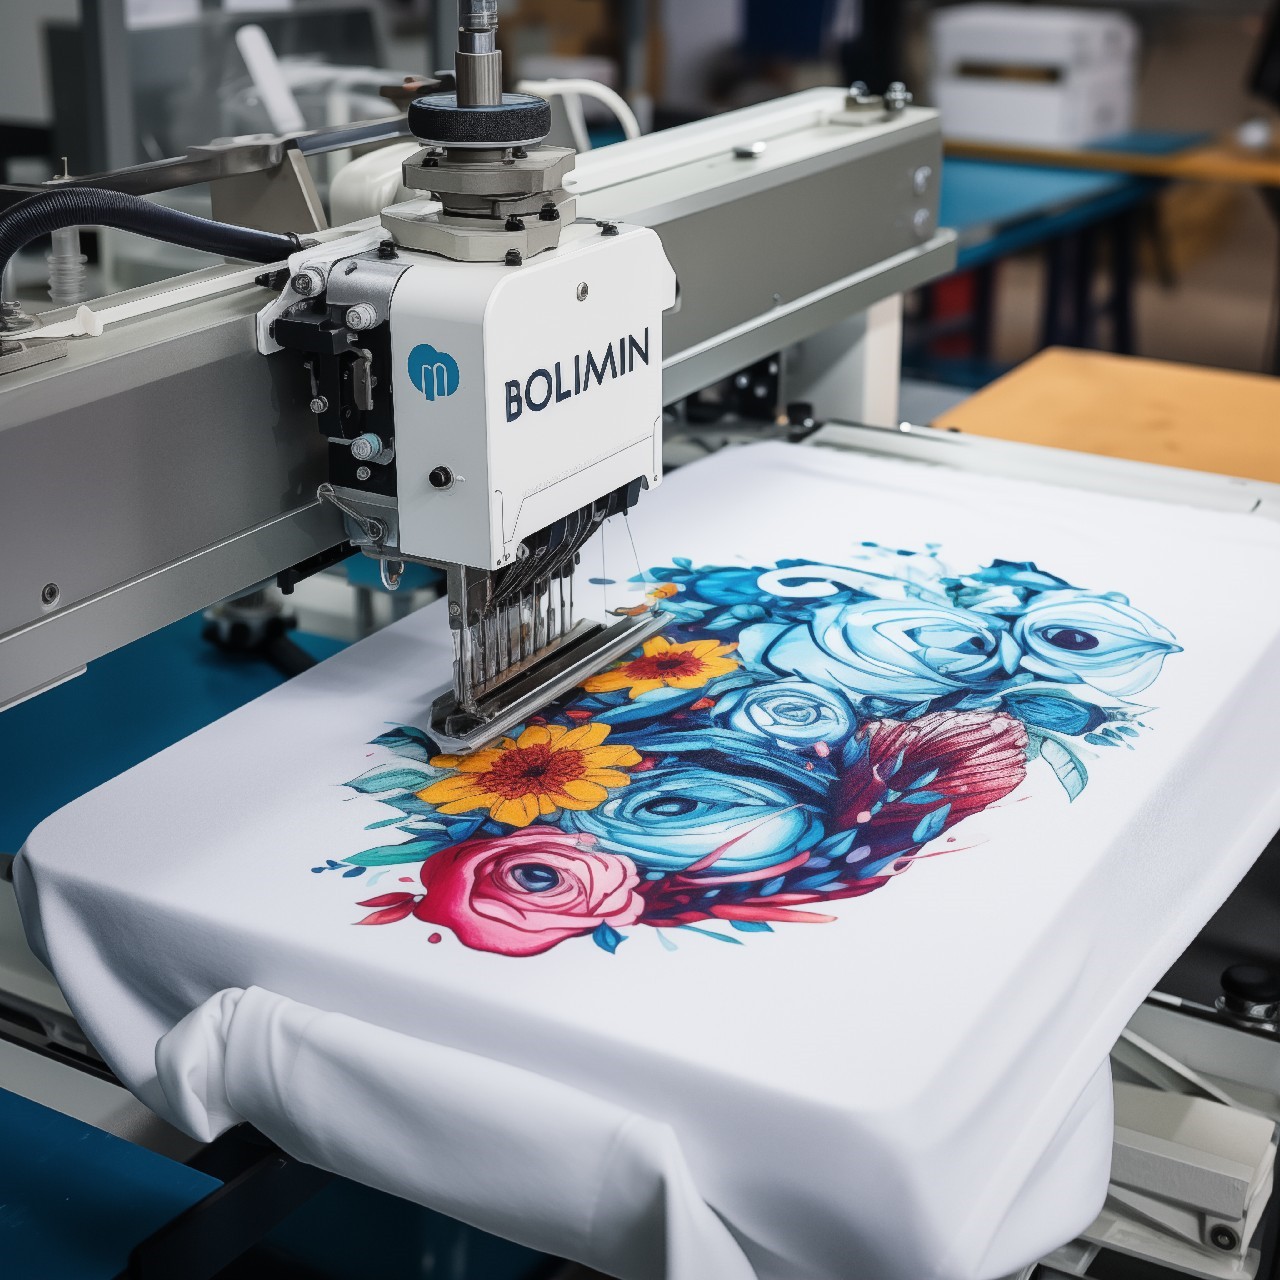 Non-toxic design printing with 100% biodegradable inks